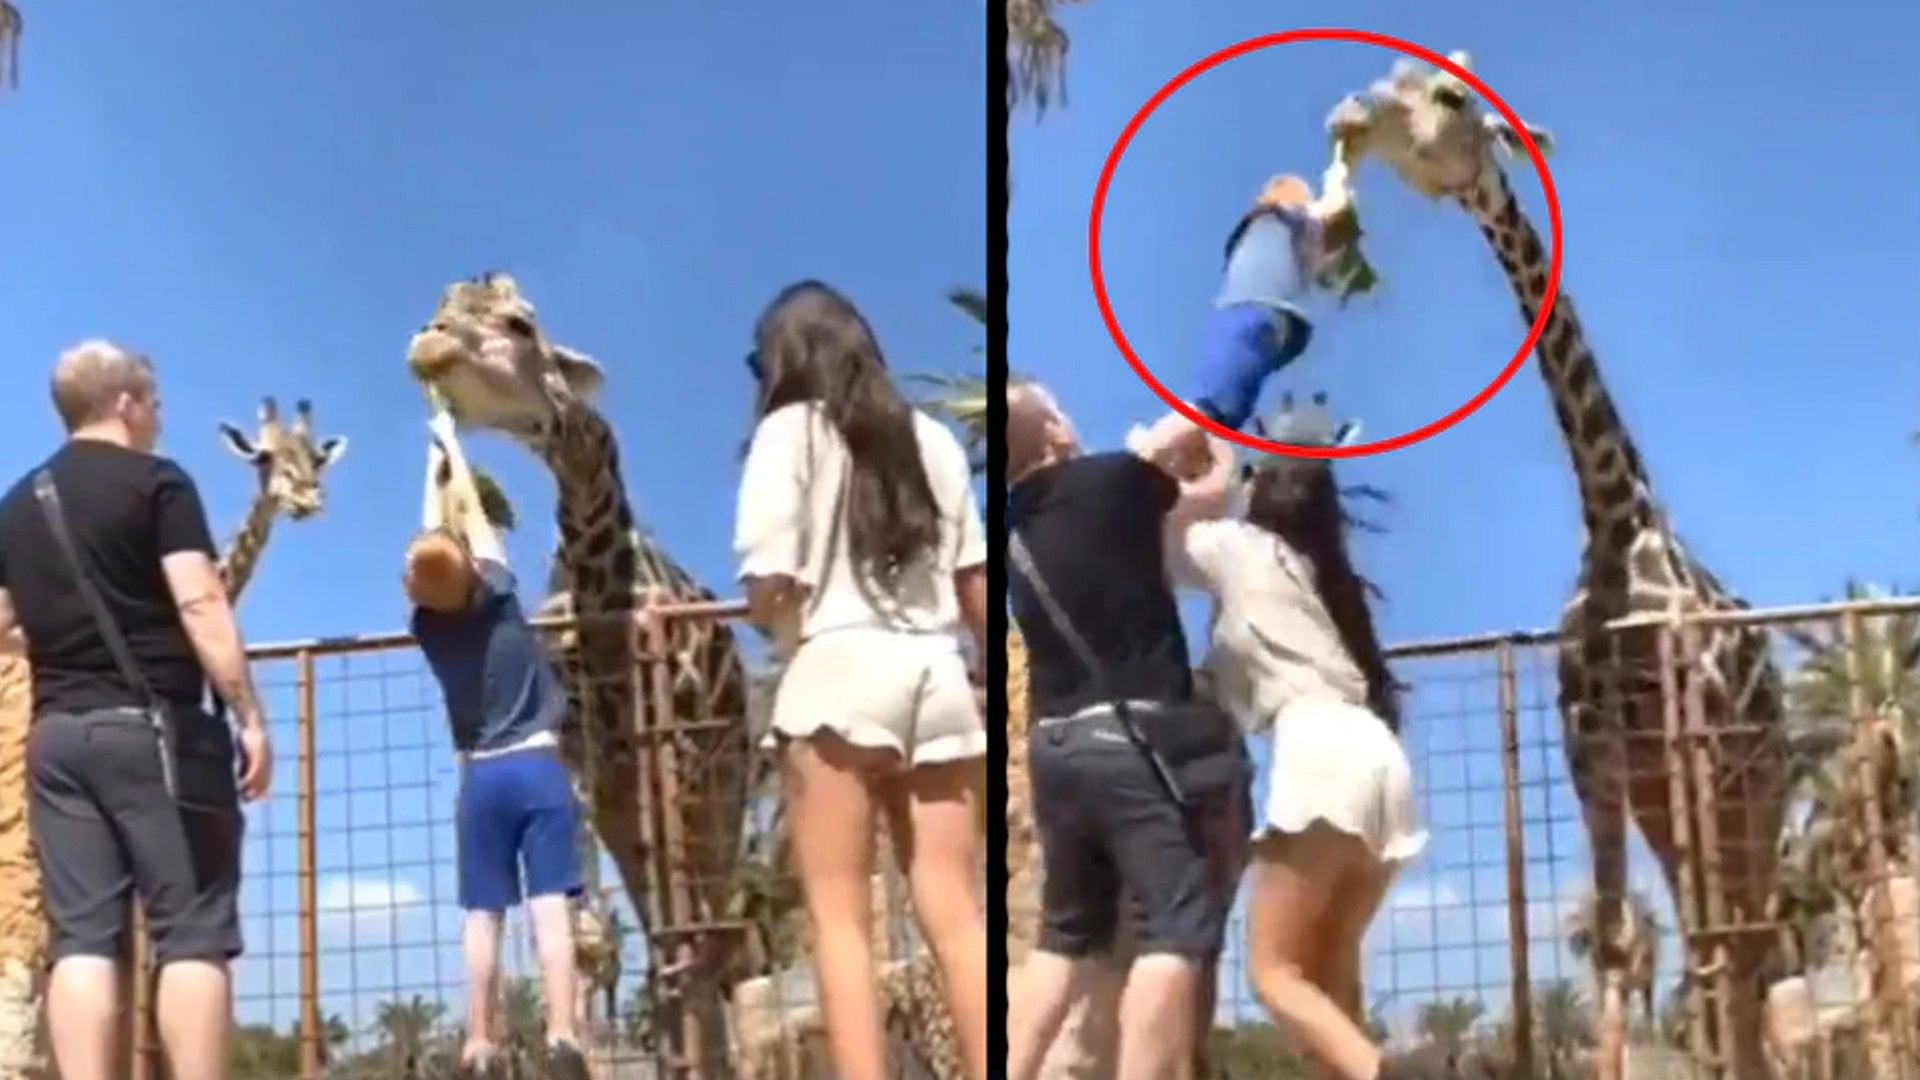 Feeding the giraffe was heavy on the child you will be stunned by watching this Shocking Video